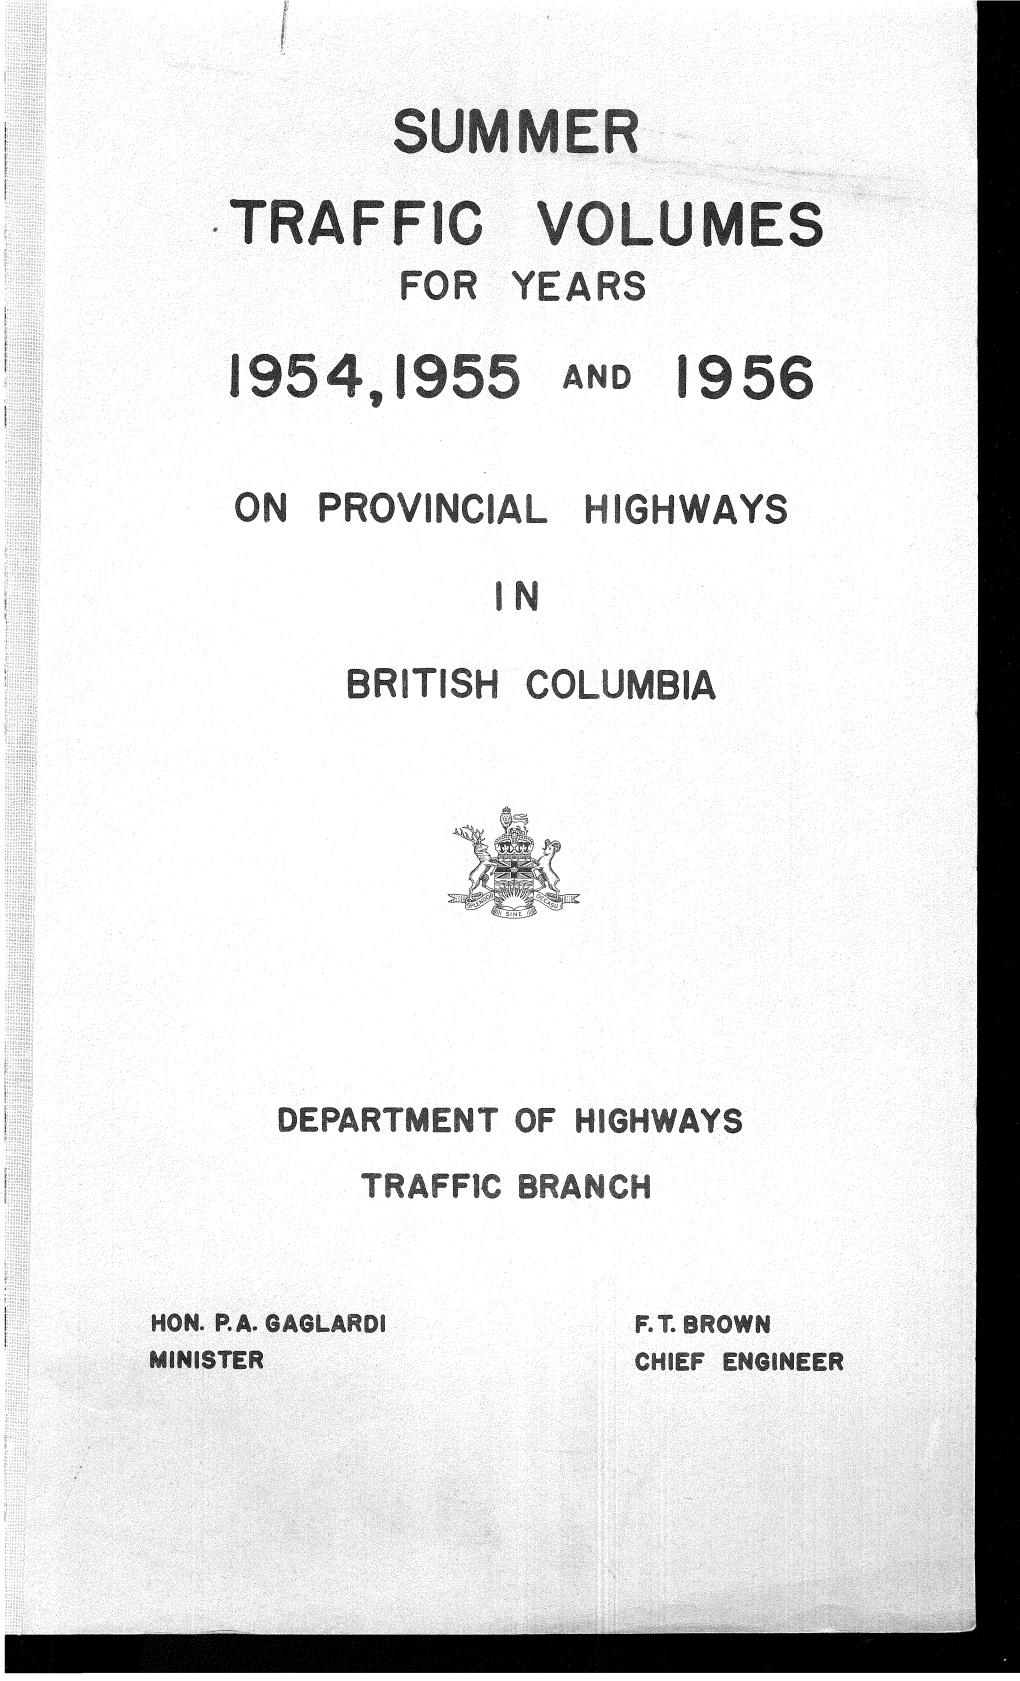 1954 1955 and 1956 Summer Traffic Volumes